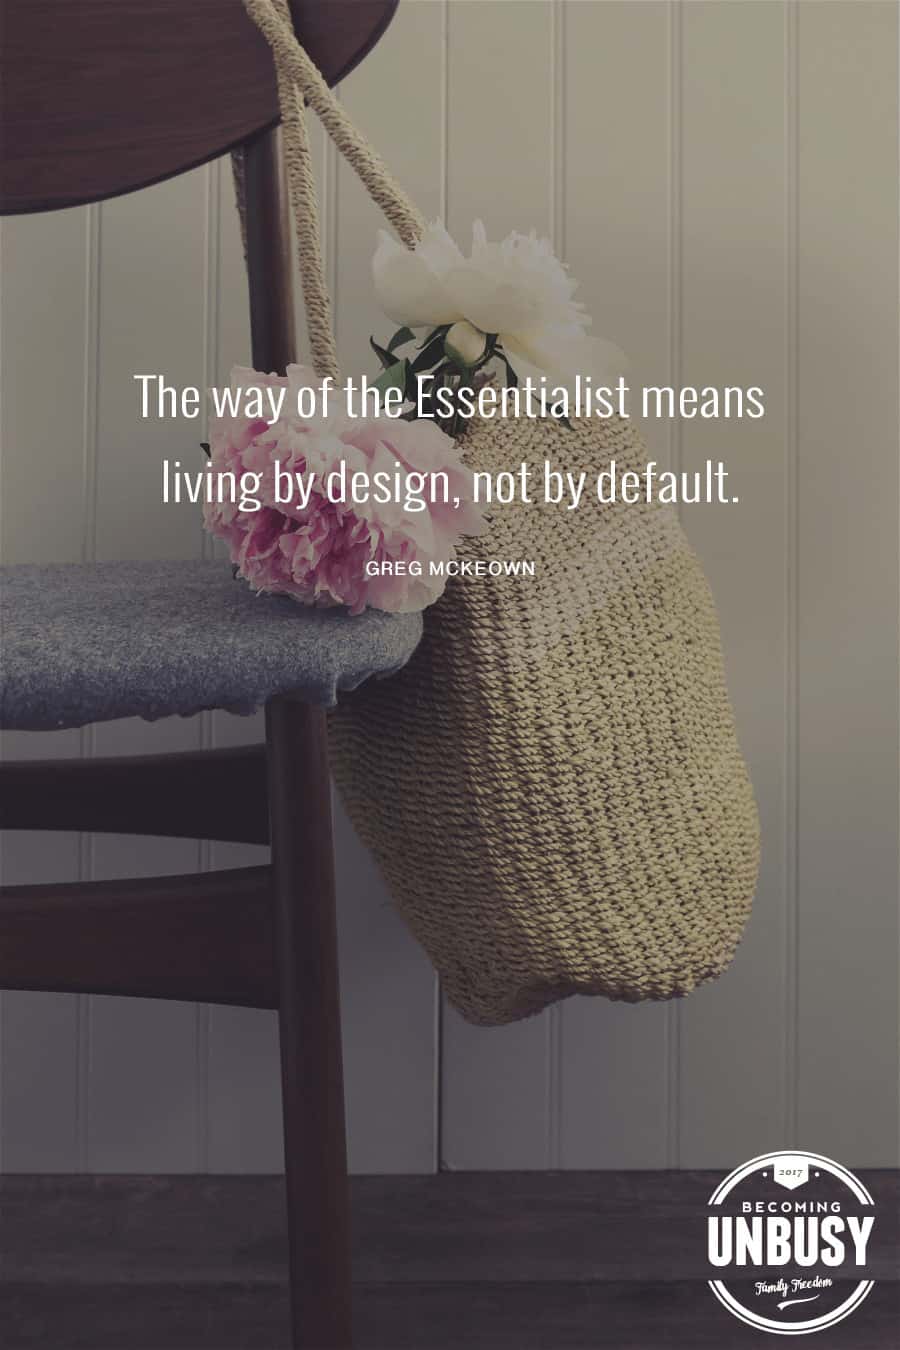 The way of the Essentialist means living by design, not by default. - Greg McKeown #BecomingUnBusy #Minimalism #Essentialism *Love this take on minimalism for the non-minimalist